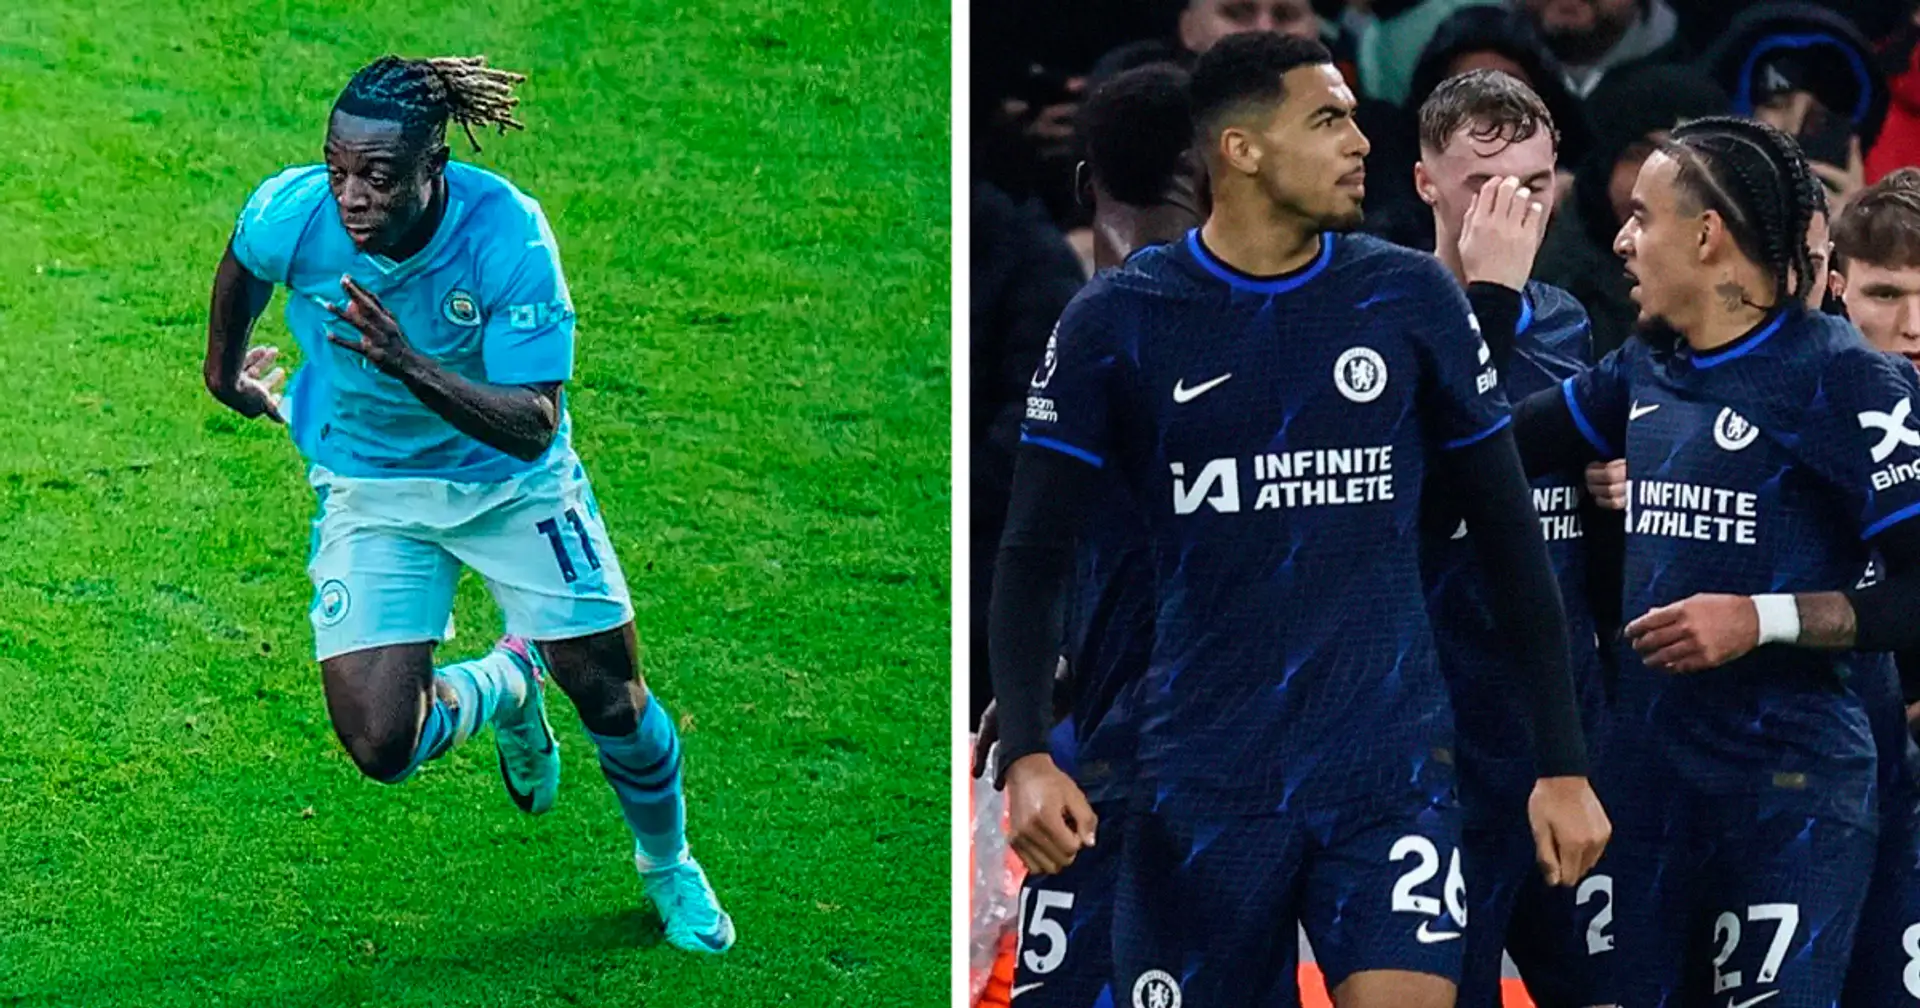 Jeremy Doku has been a menace for Man City all season — one Chelsea man credited for stopping him